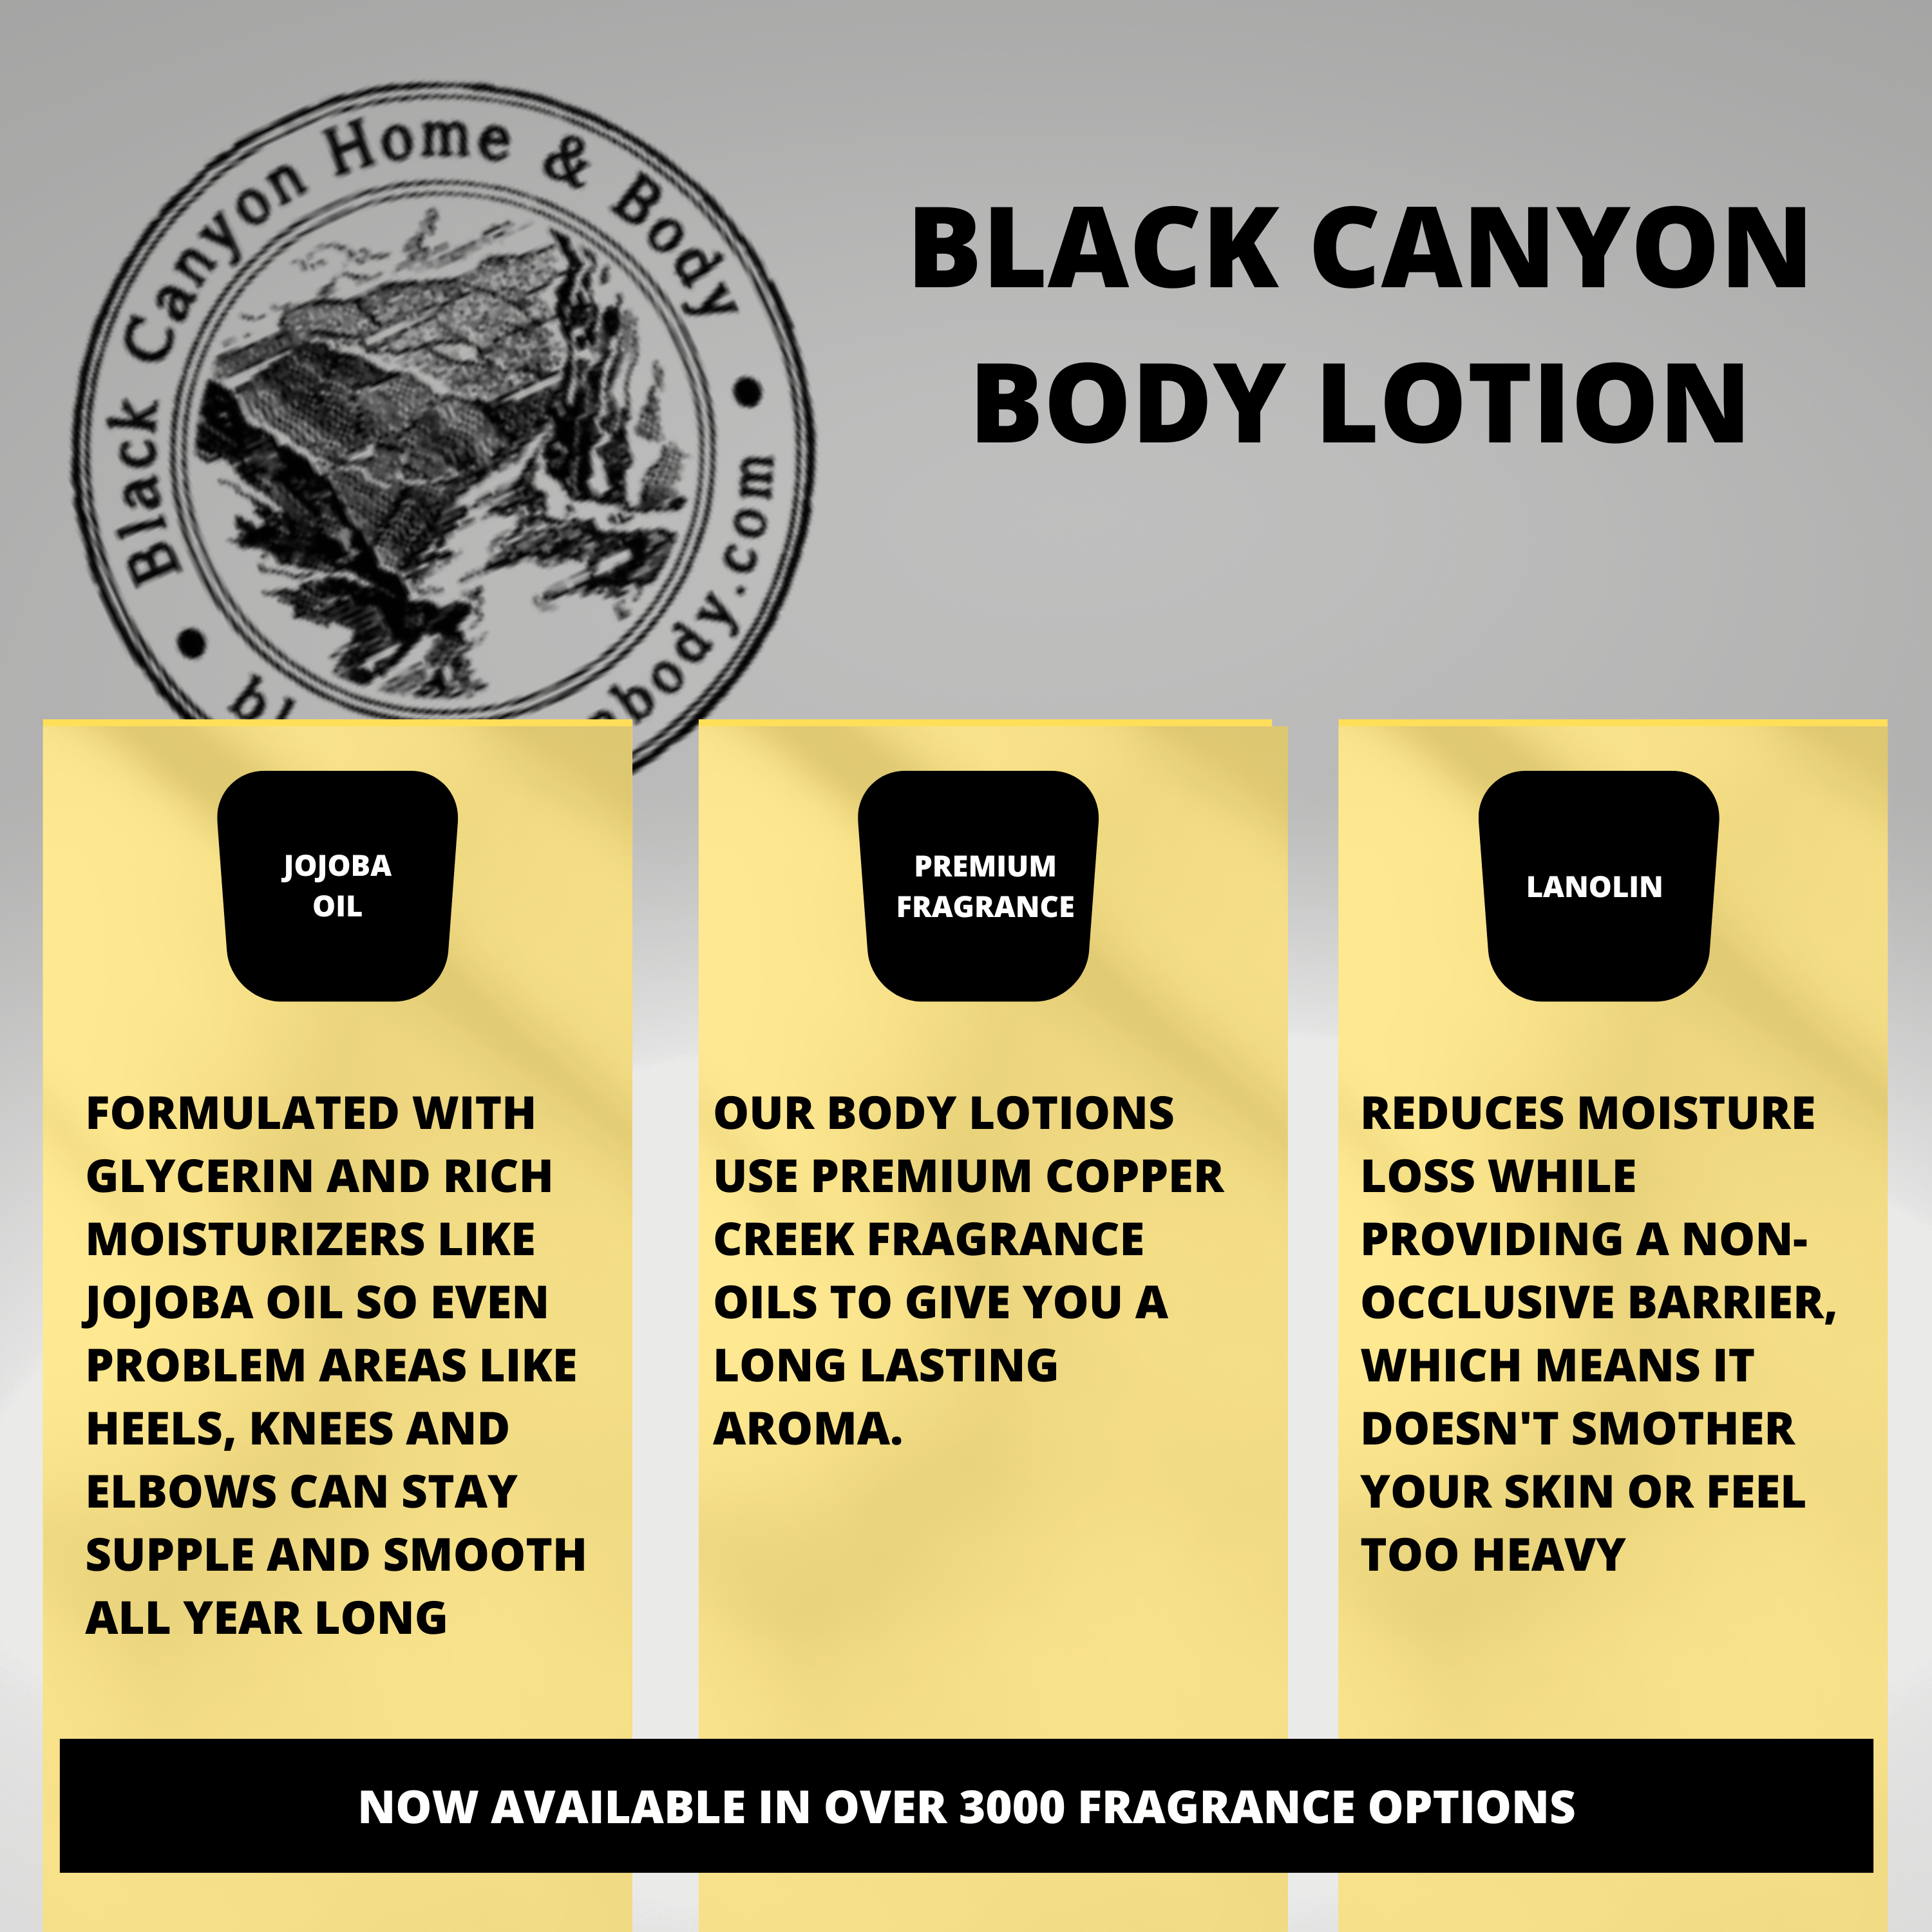 Black Canyon Agave & Sea Kelp Scented Luxury Body Lotion with Lanolin and Jojoba Oil